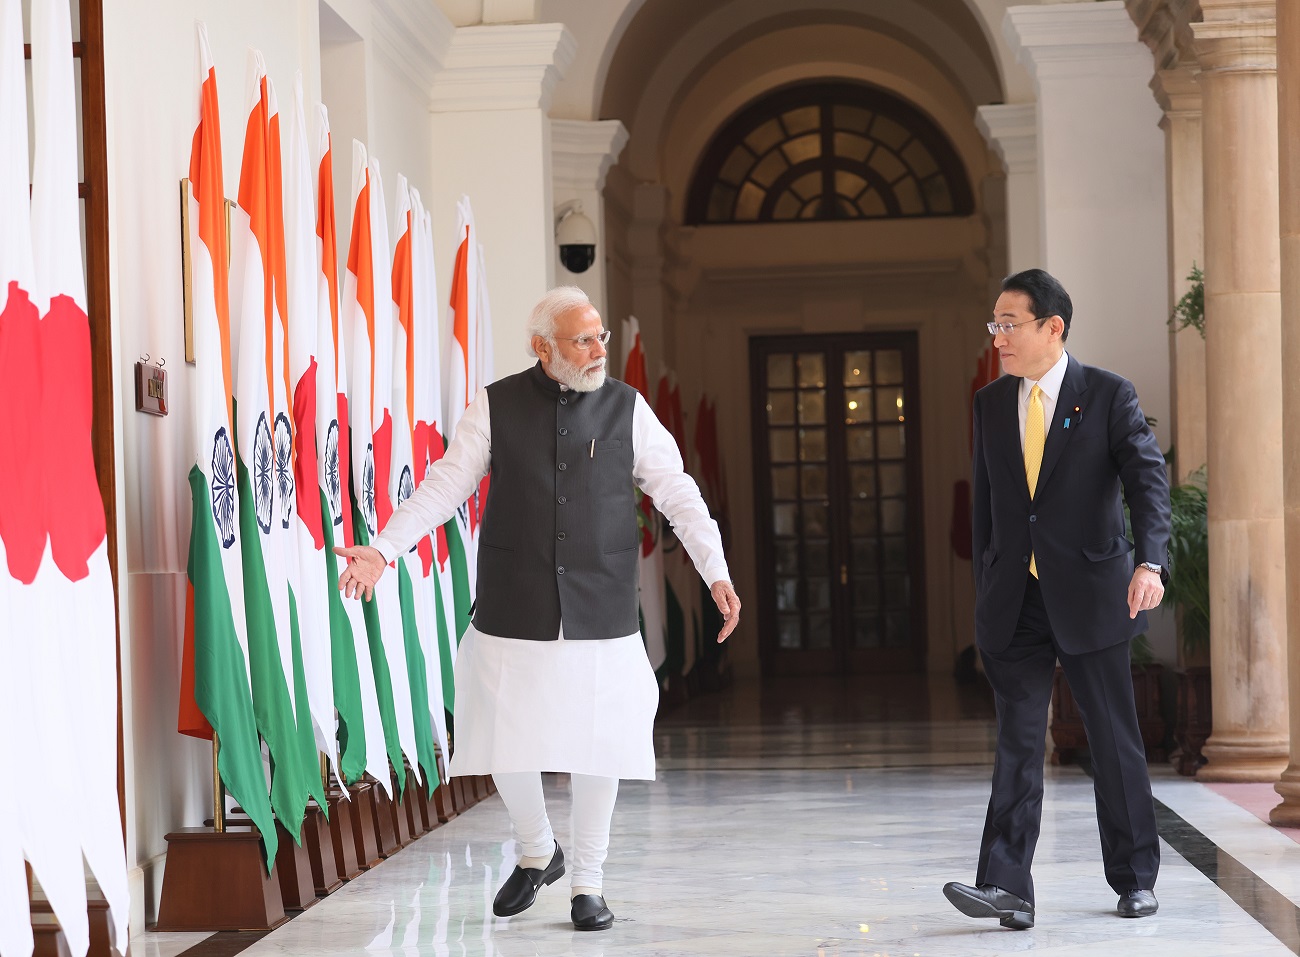 Photograph of the Prime Ministers heading to a summit meeting (3)